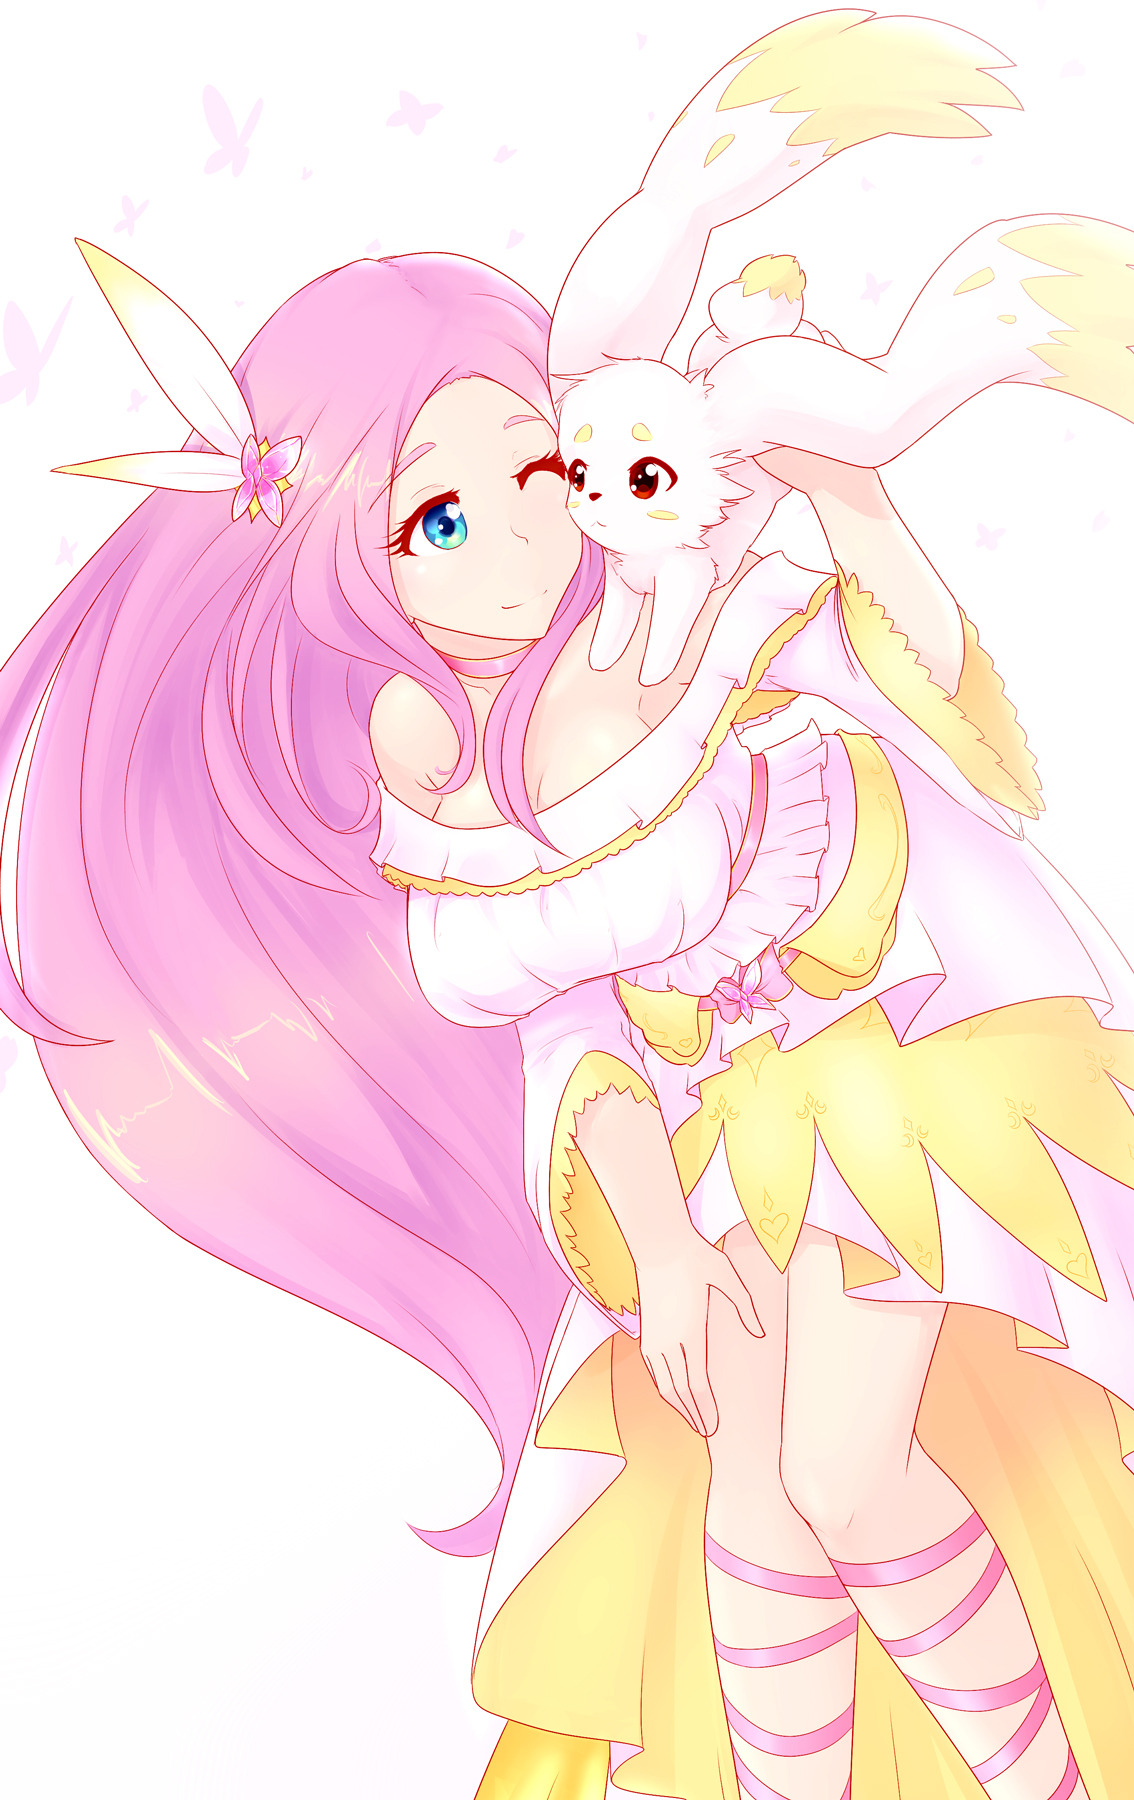 Fluttershy and Angel BunnyJust drawing for fun